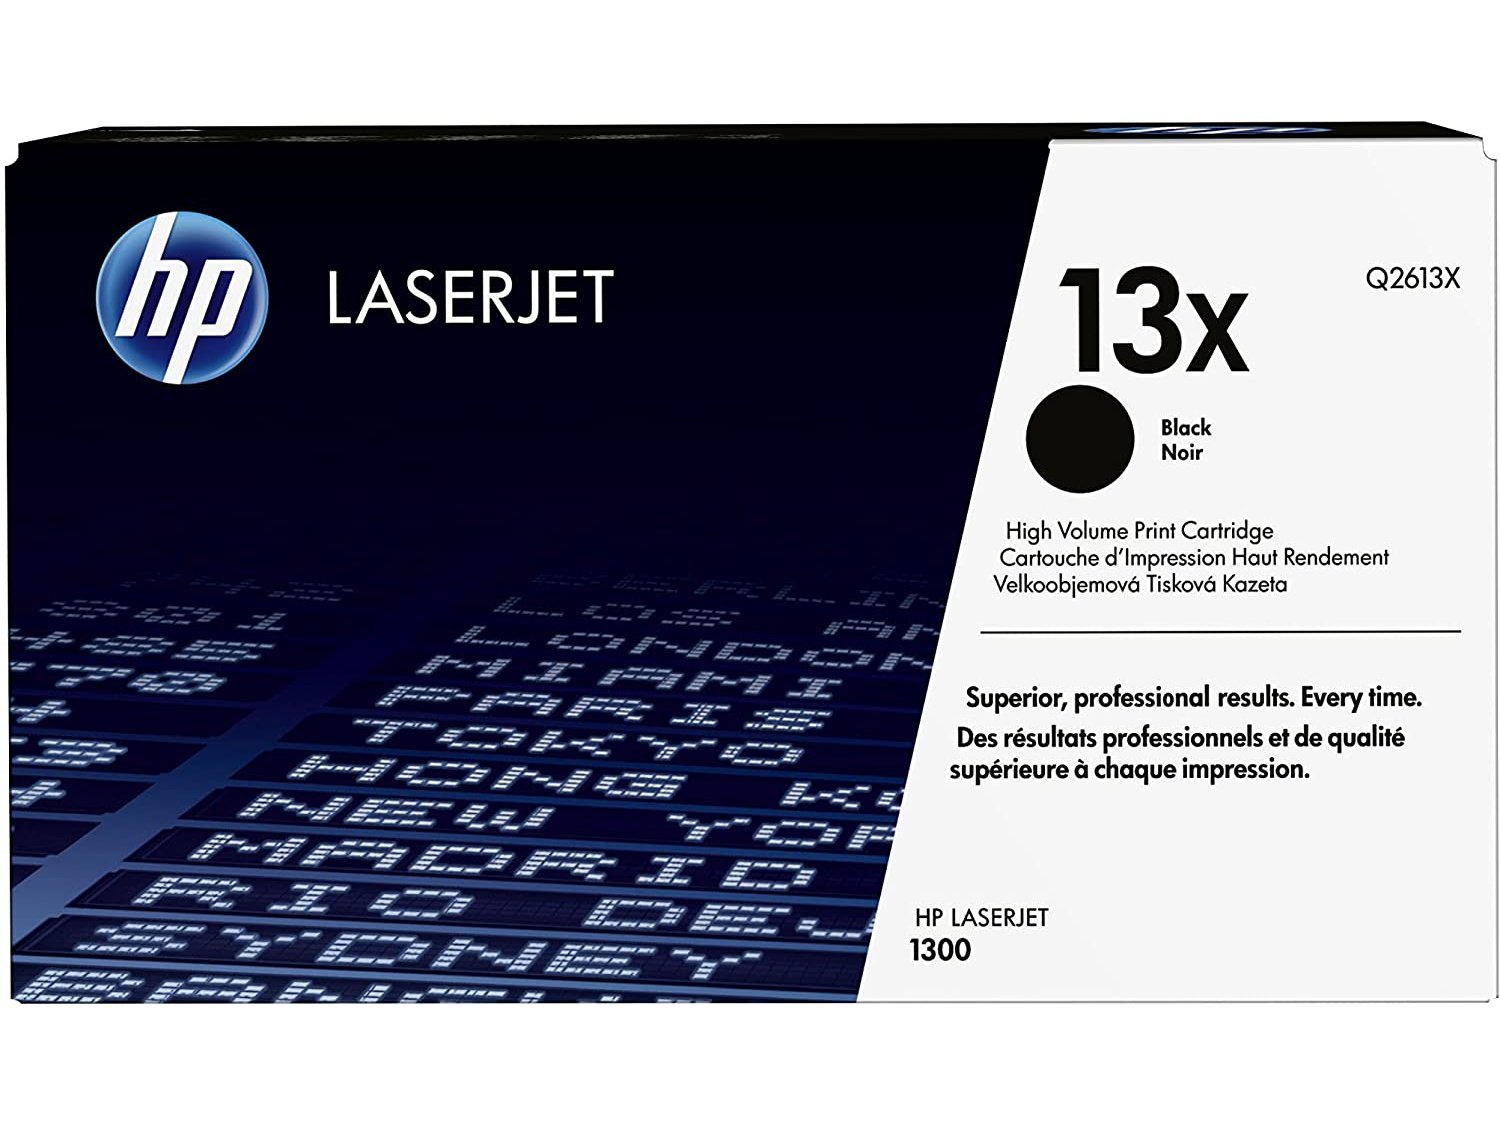 ICU Compatible/OEM Get HP ICU-HP-Q2613X-STANDARD Yields 4000 Pages Q2613X Toner Cartridge (Black) 4000 Page Yield